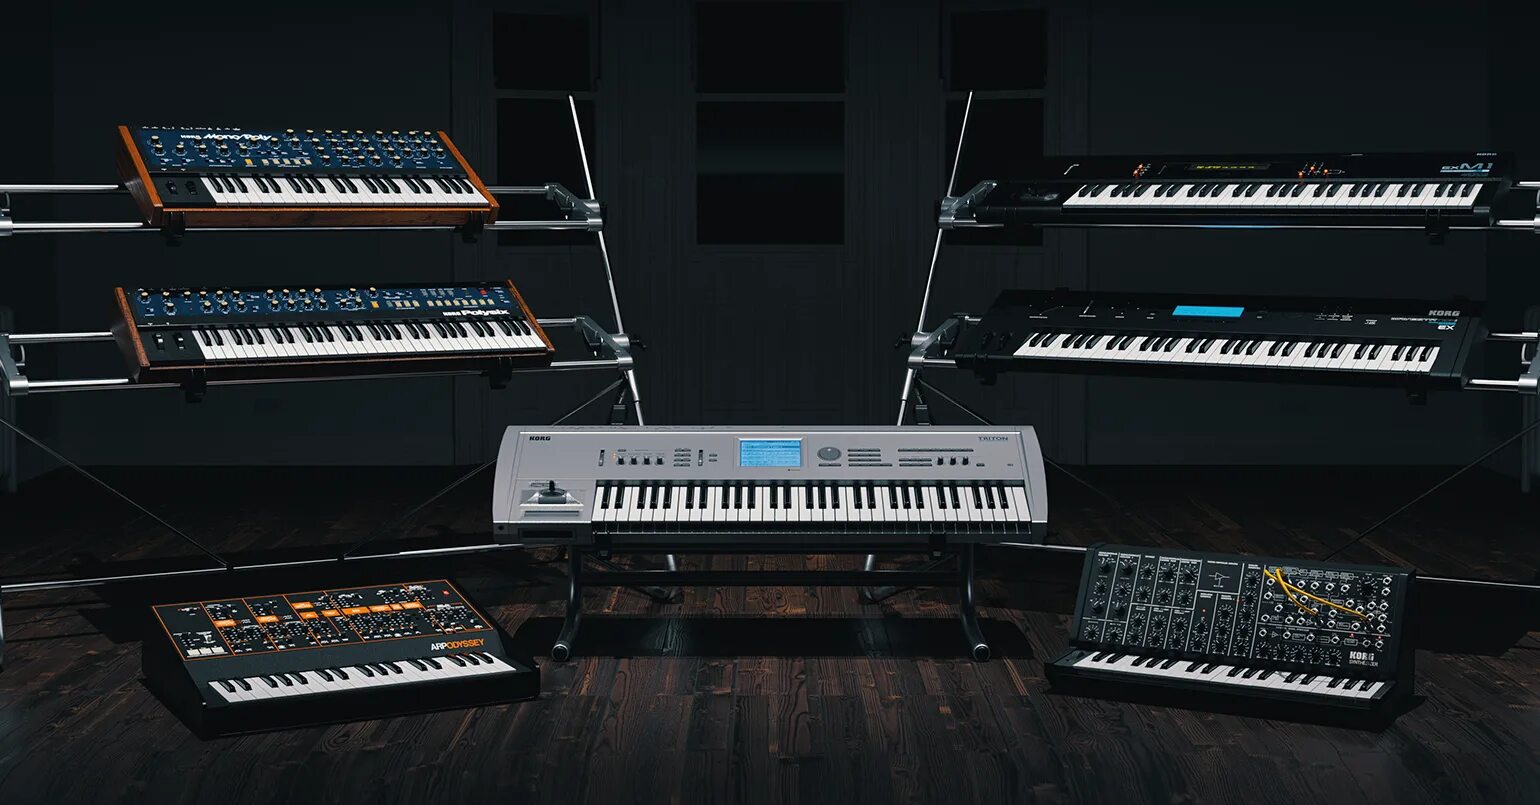 Korg collection. Korg collection - Triton. Синтезатор Korg i3. Korg VST синтезатор. Korg Synthesizers (Legacy collection).